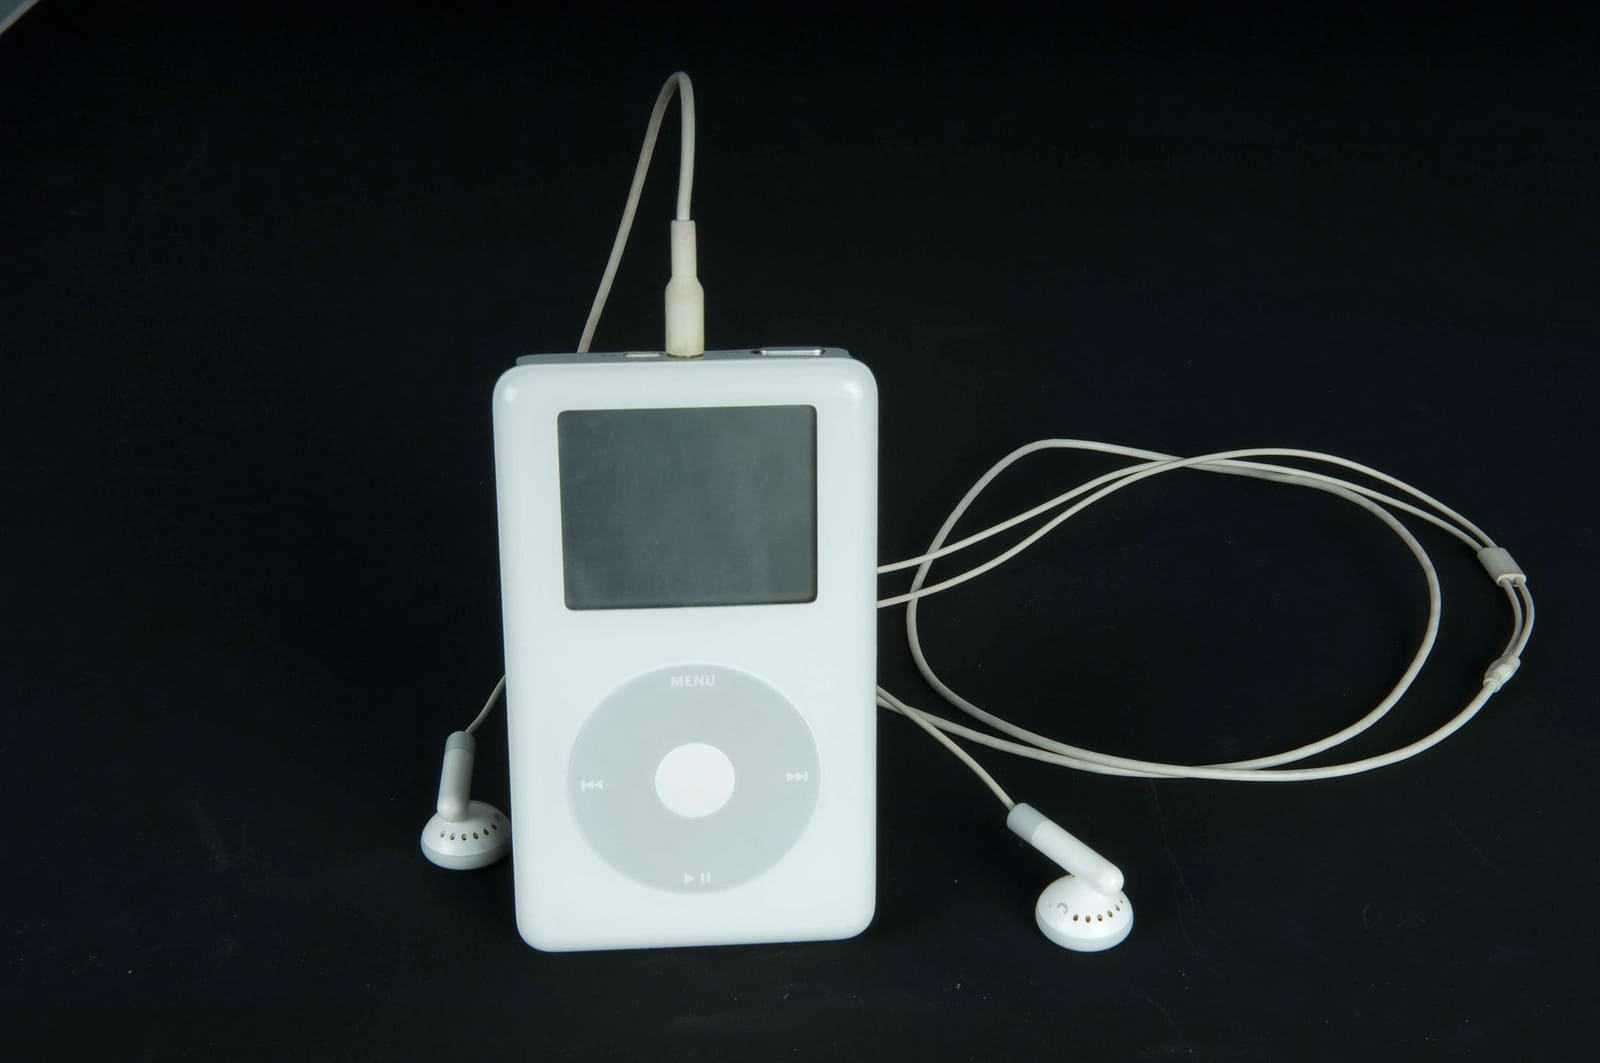 The fourth-generation iPod brought key improvements like the Click Wheel, but still left some people disappointed.